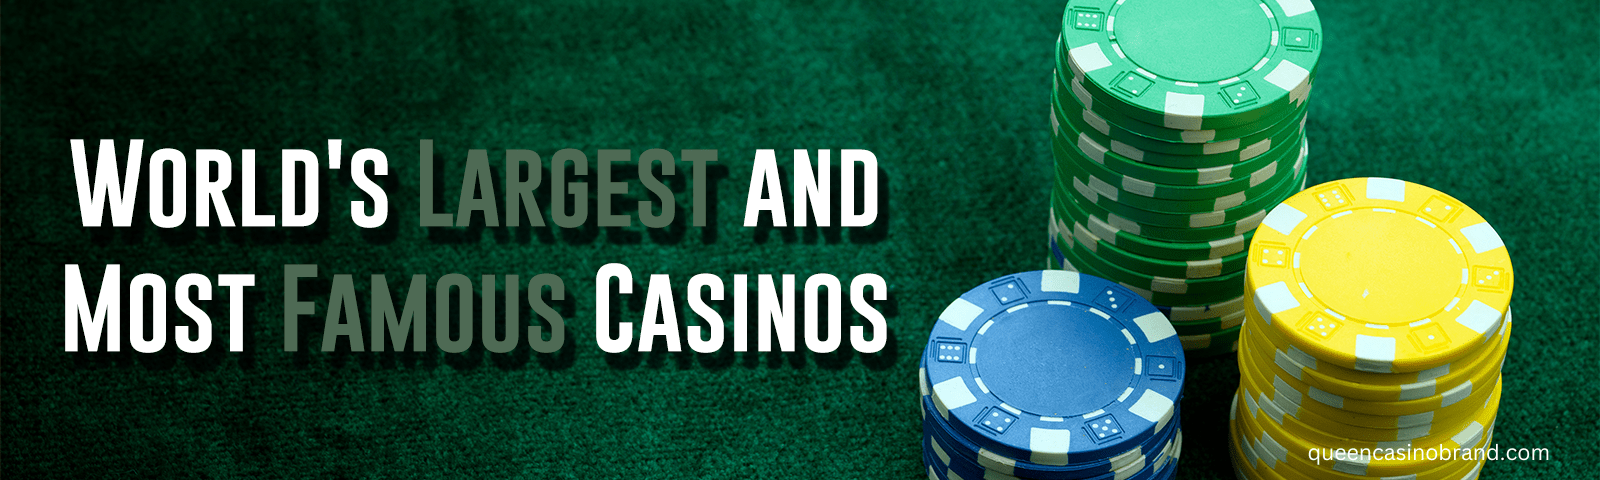 World's Largest and Most Famous Casinos